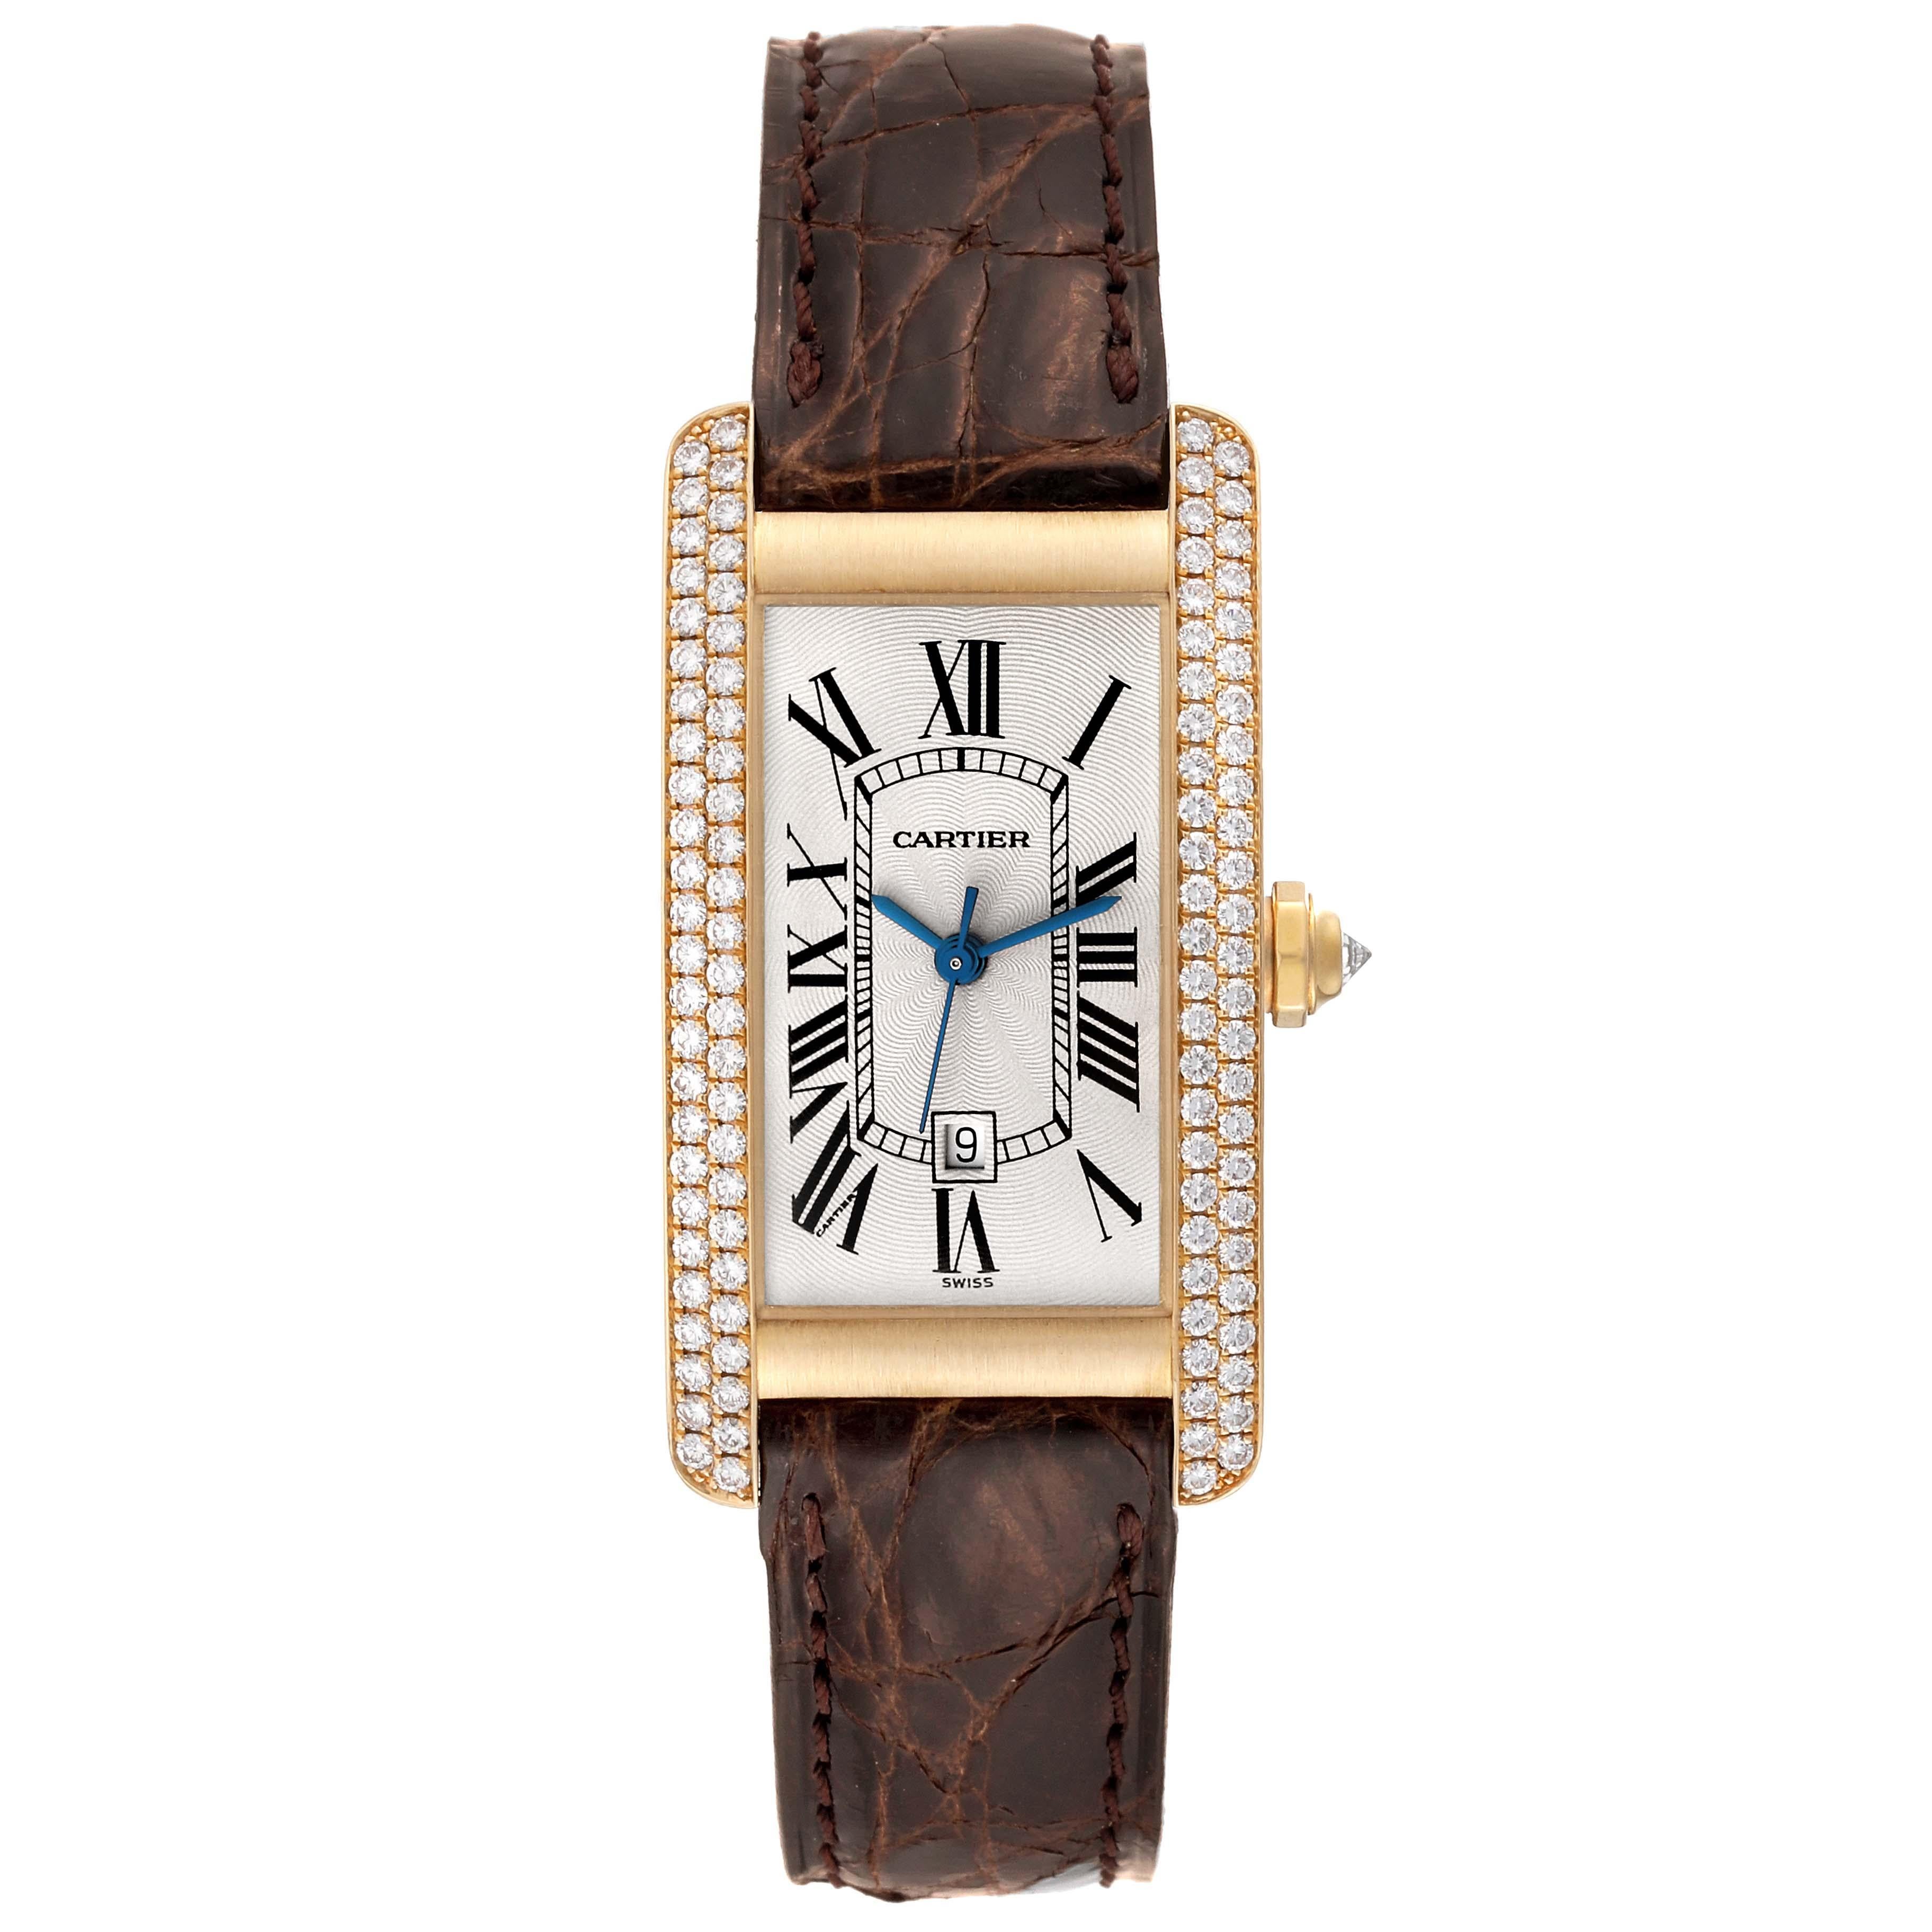 Cartier Tank Americaine Yellow Gold Diamond Ladies Watch WB7019K2. Automatic self-winding movement. 18K yellow gold case 22.5 x 41.5 mm. Circular grained crown set with an original Cartier factory diamond. Original Cartier factory two row diamond